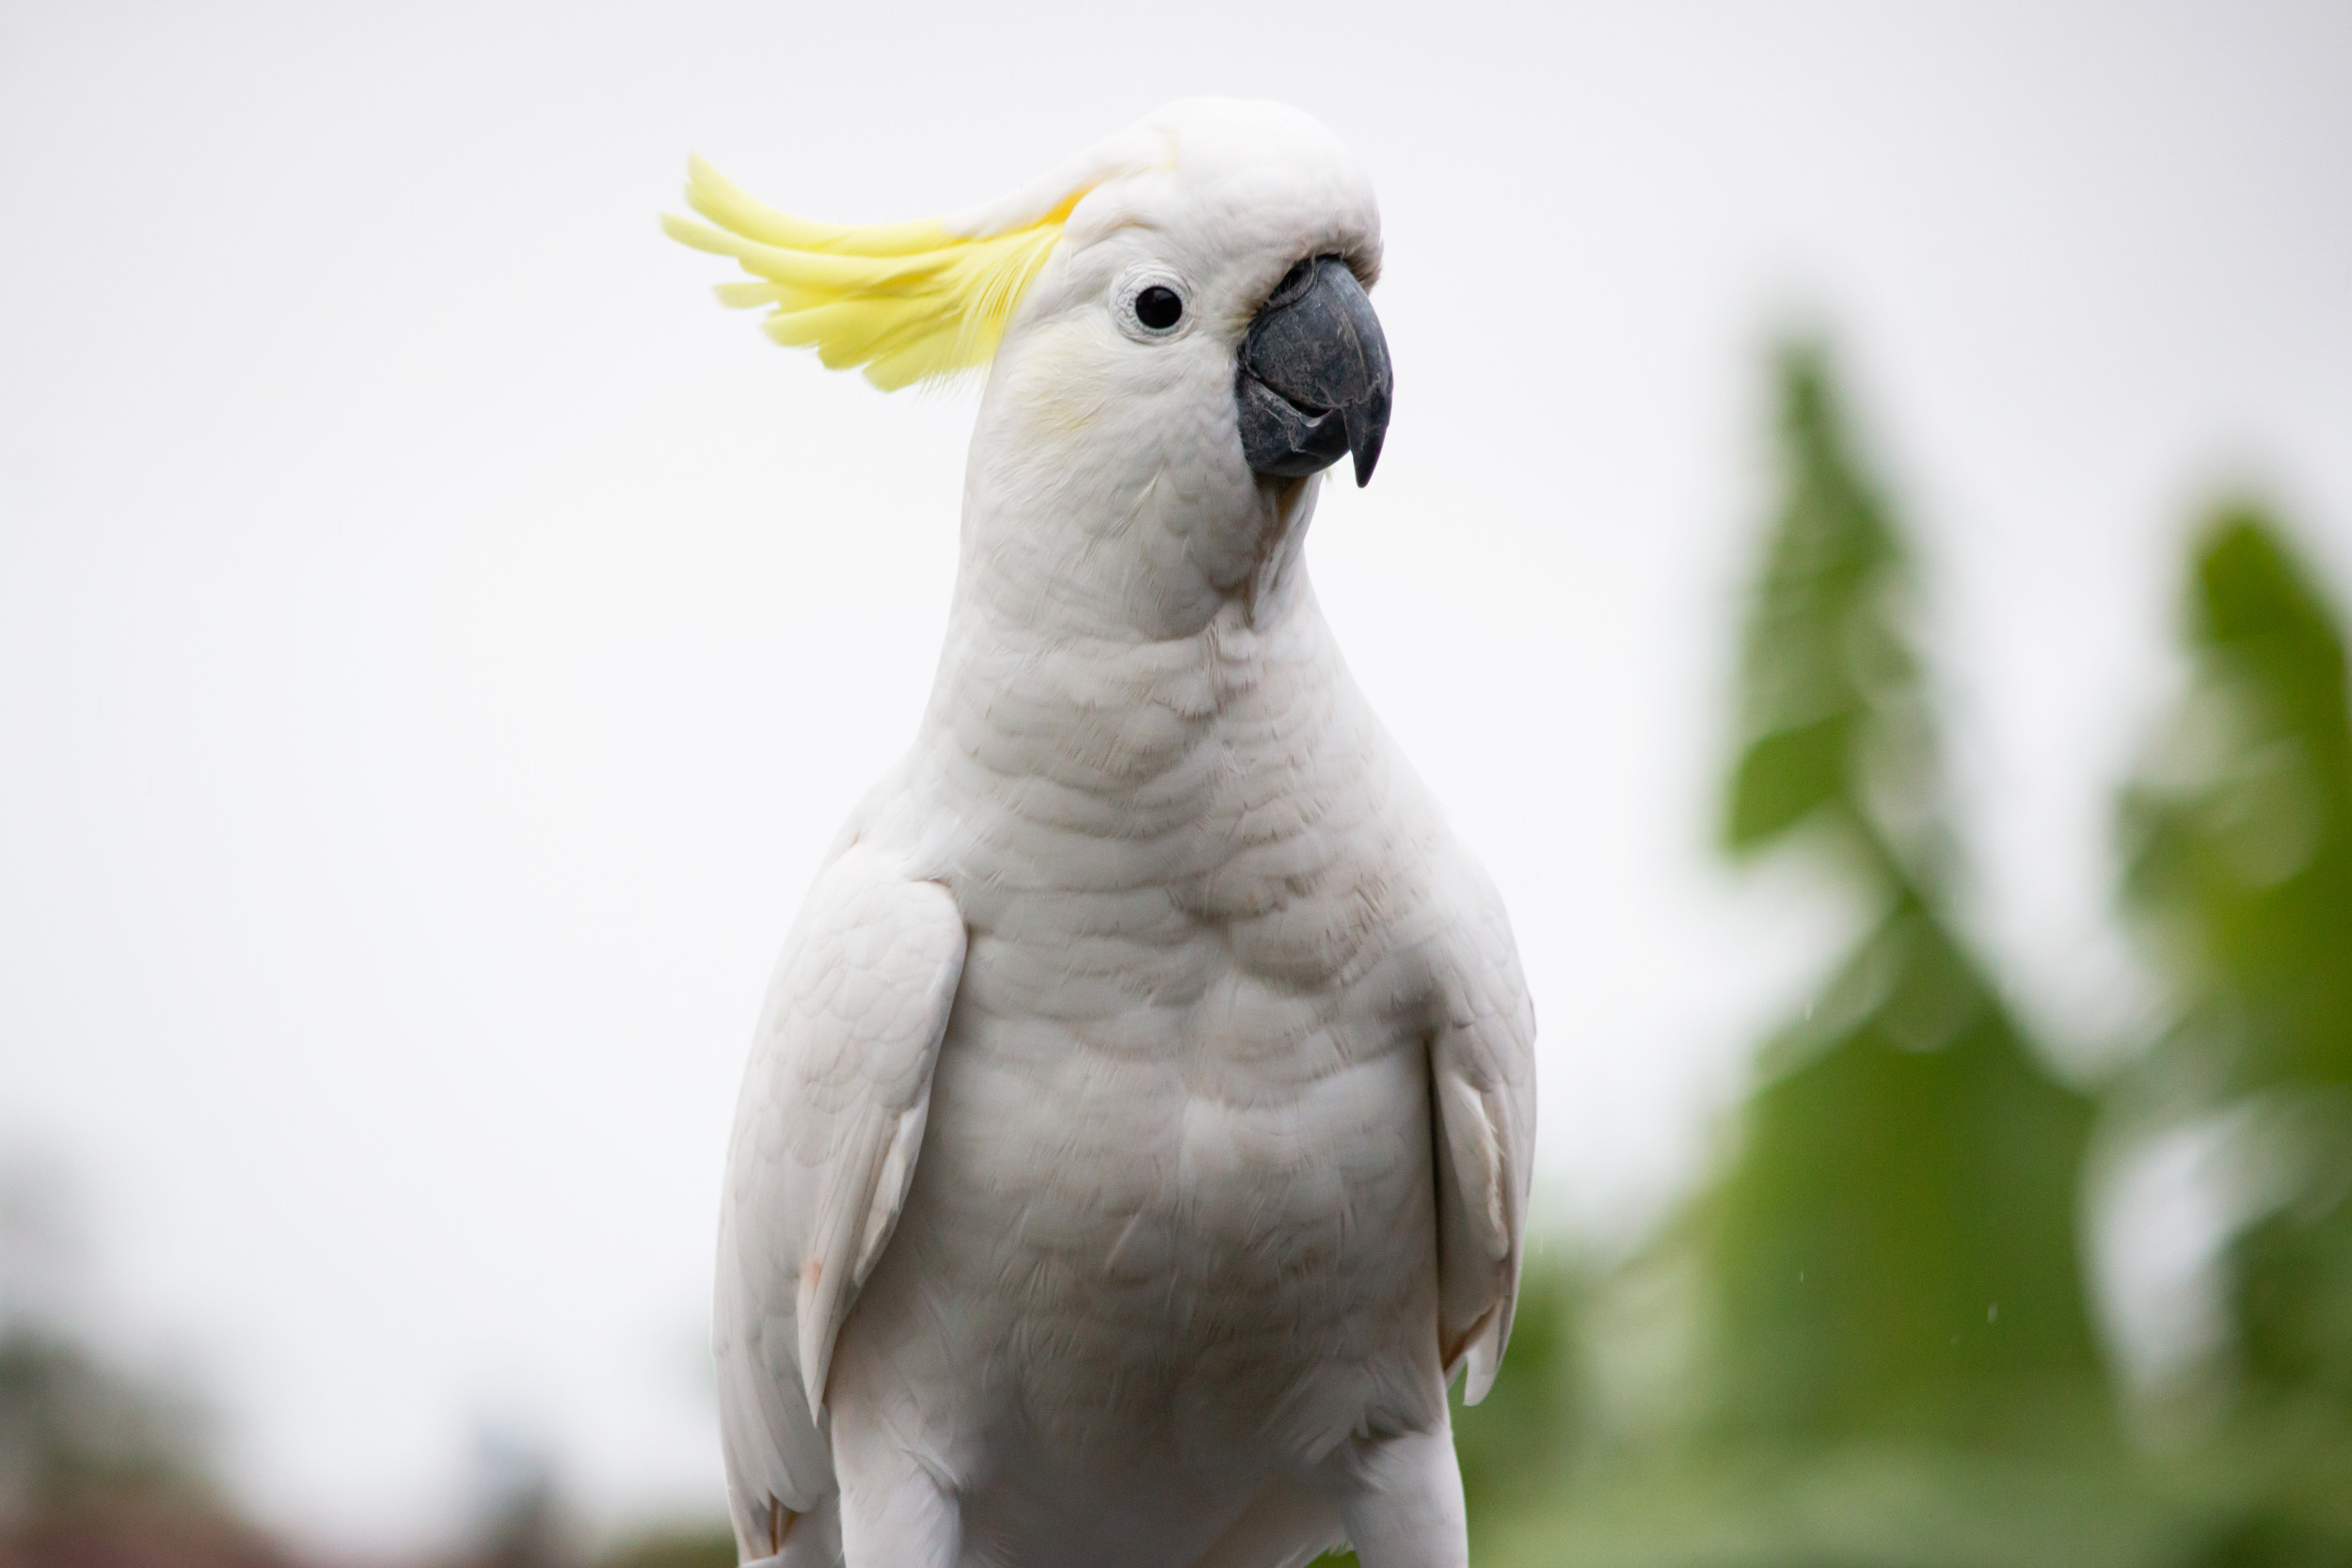 Watch Hilarious Parrot Dancing to 'Everytime We Touch' in Viral Clip